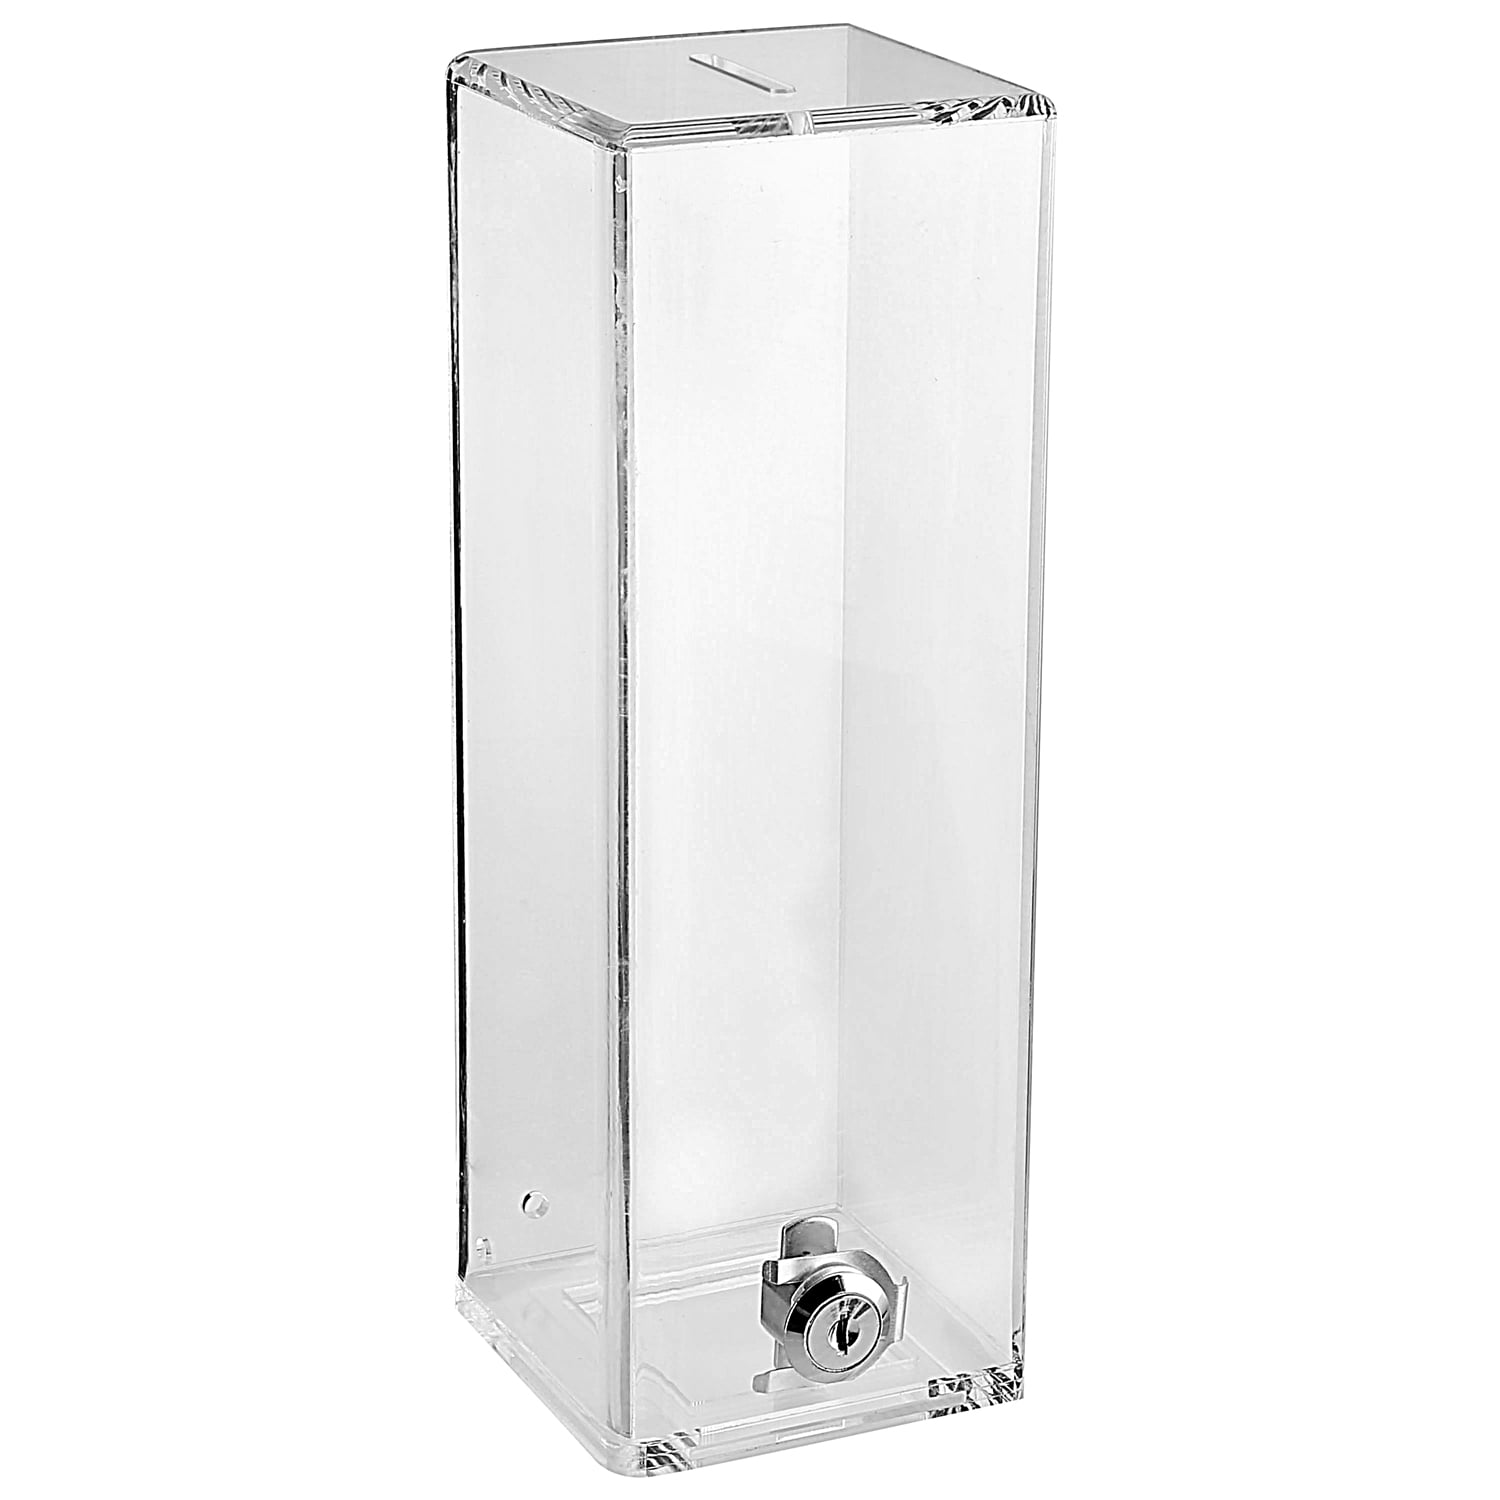 A Square Acrylic Coin Box-Large Size 